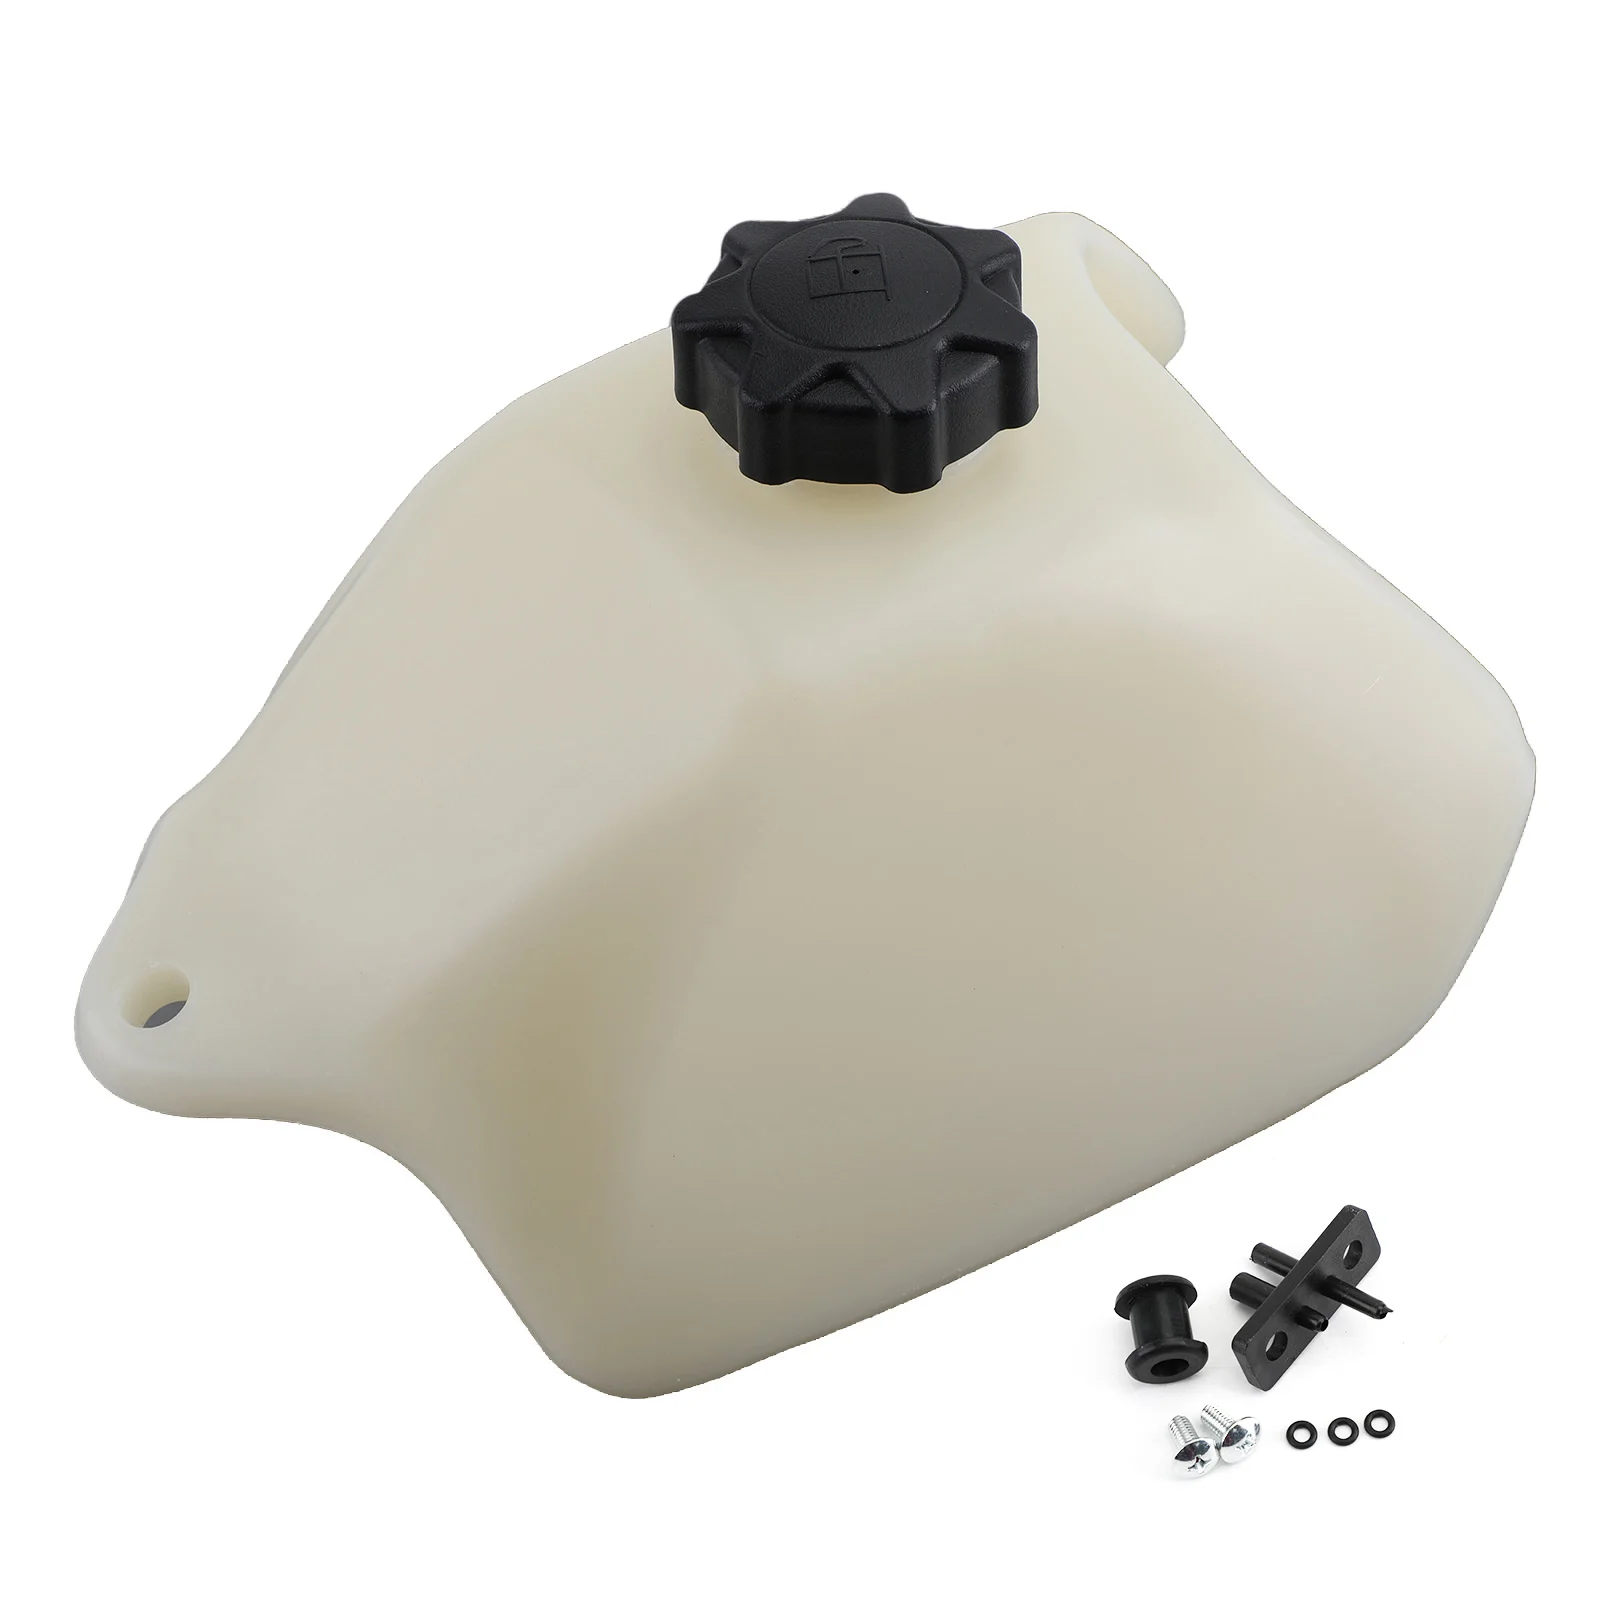 

Replacement Plastic Fuel Tank & Gas Cover for Honda TRX70 FourTrax 70 1986 1987, Refer to pictures